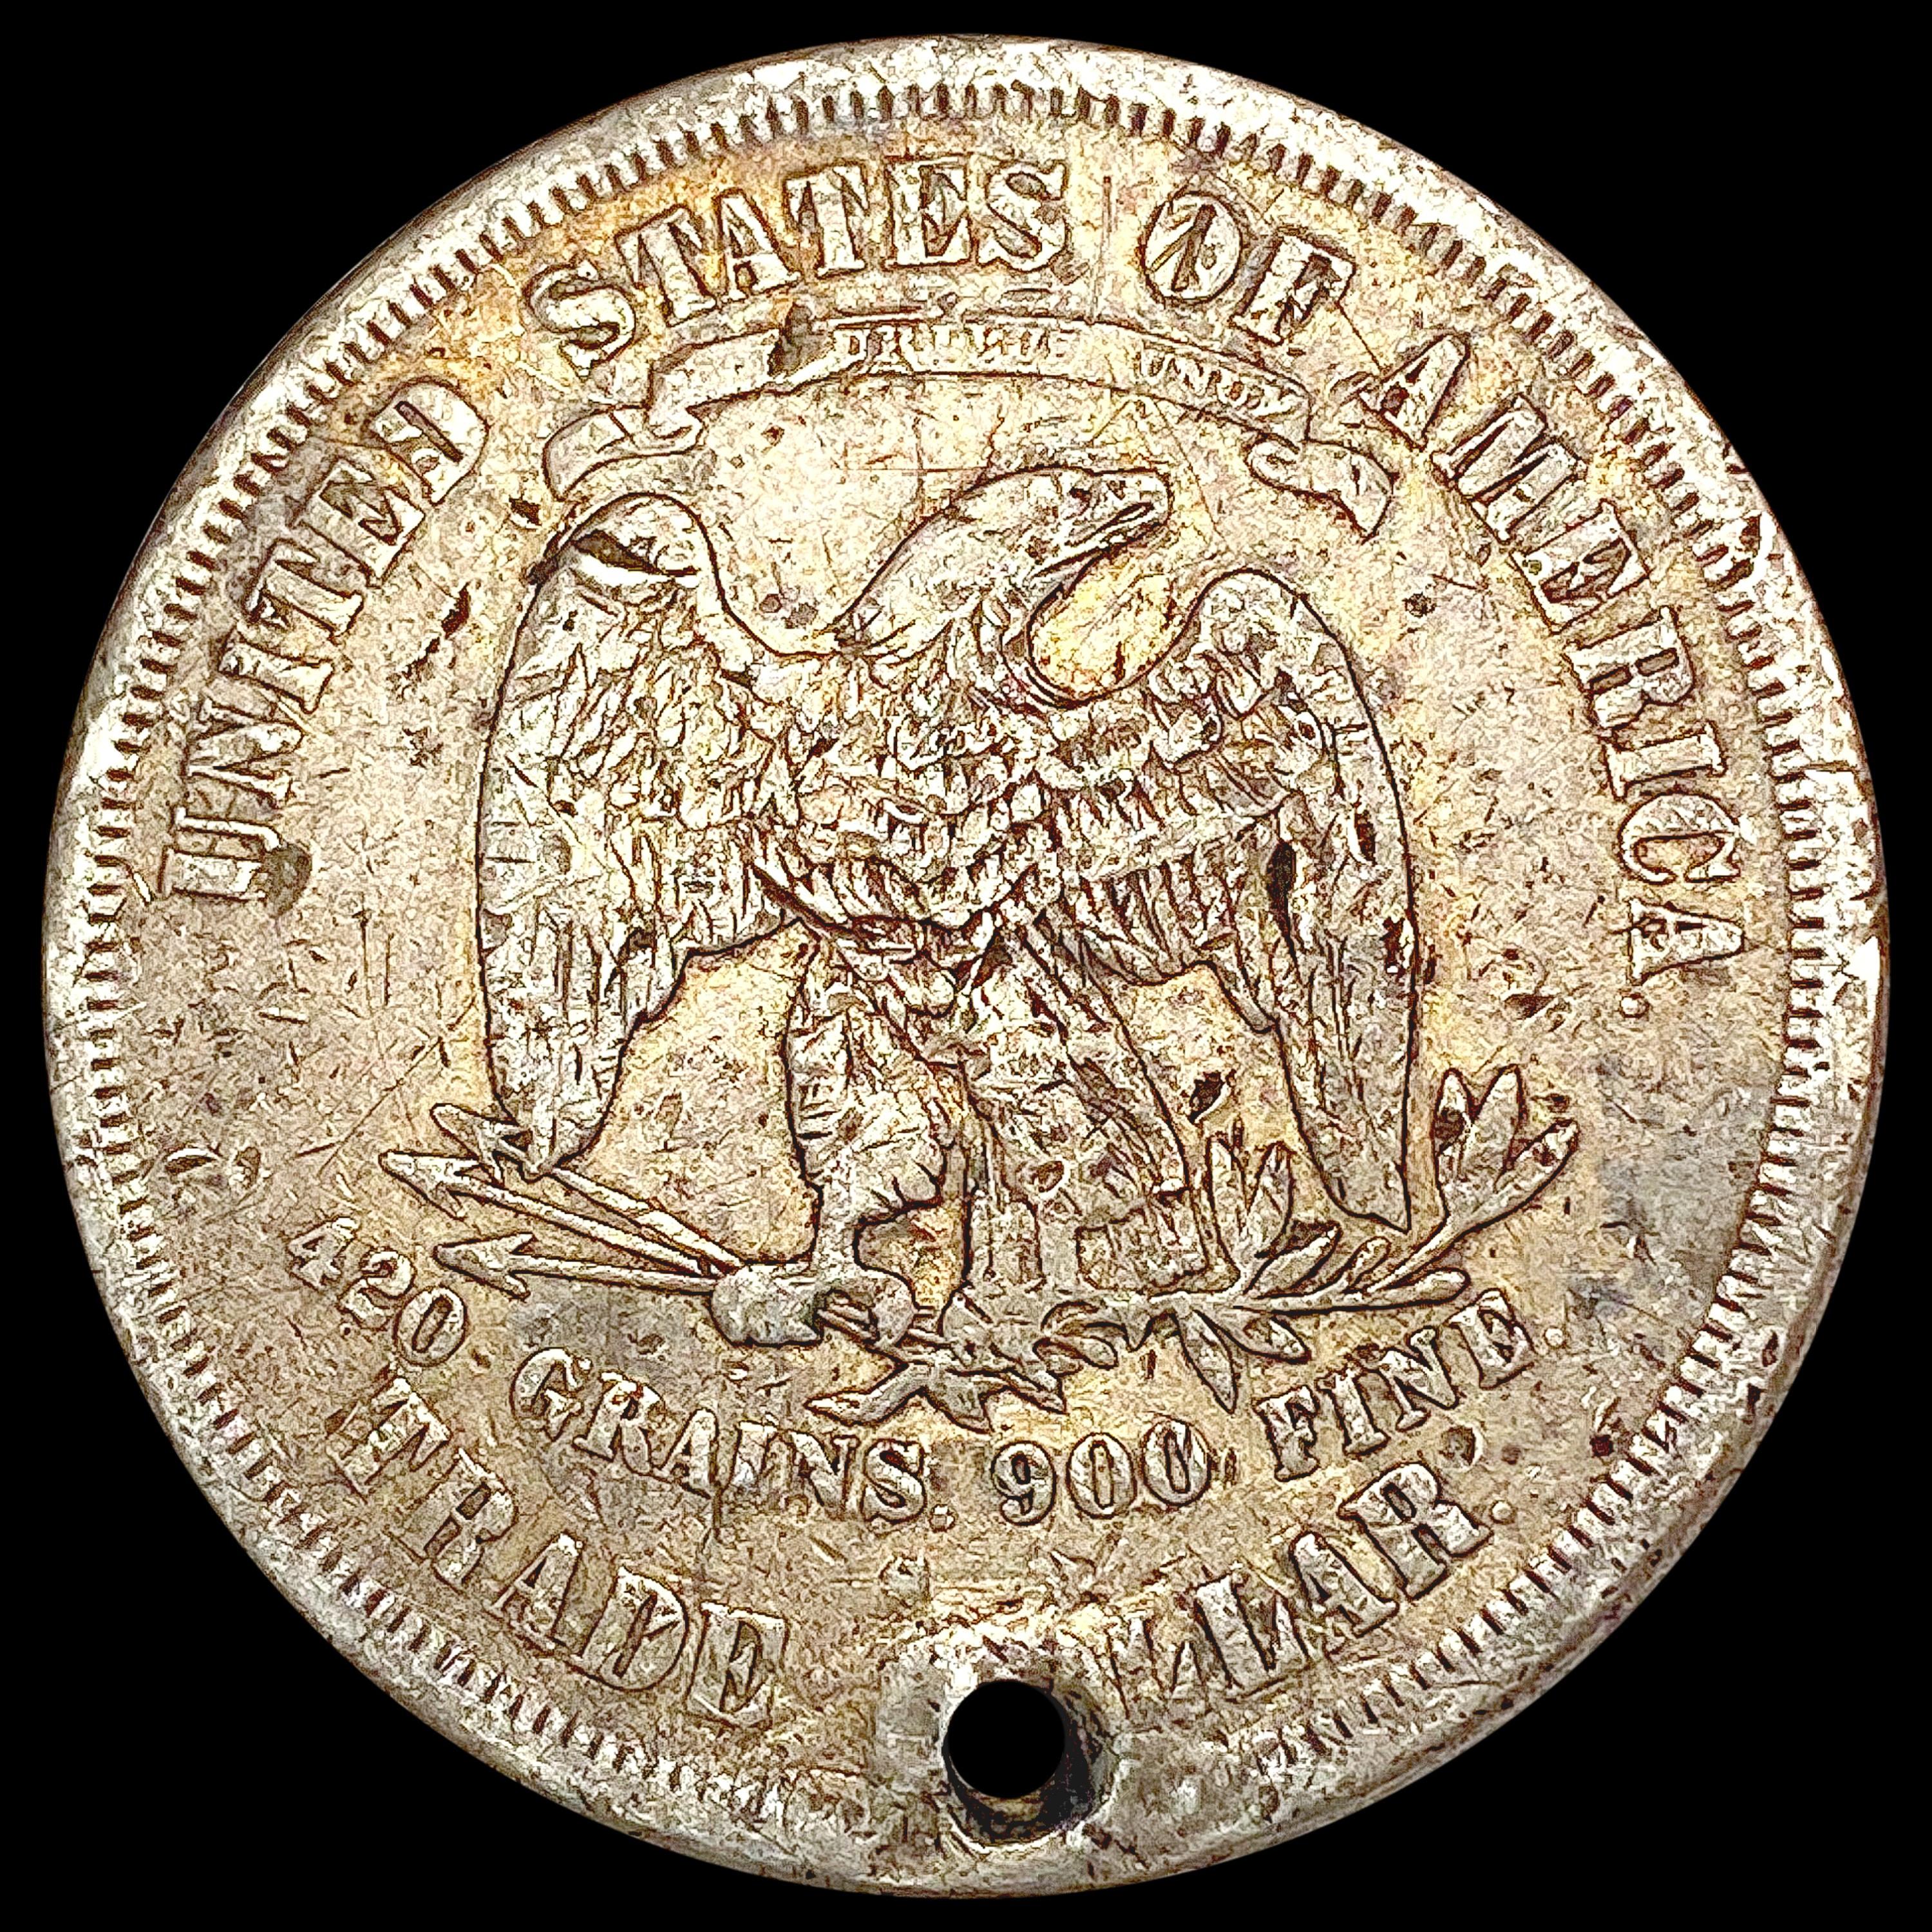 1876-S Silver Trade Dollar NICELY CIRCULATED